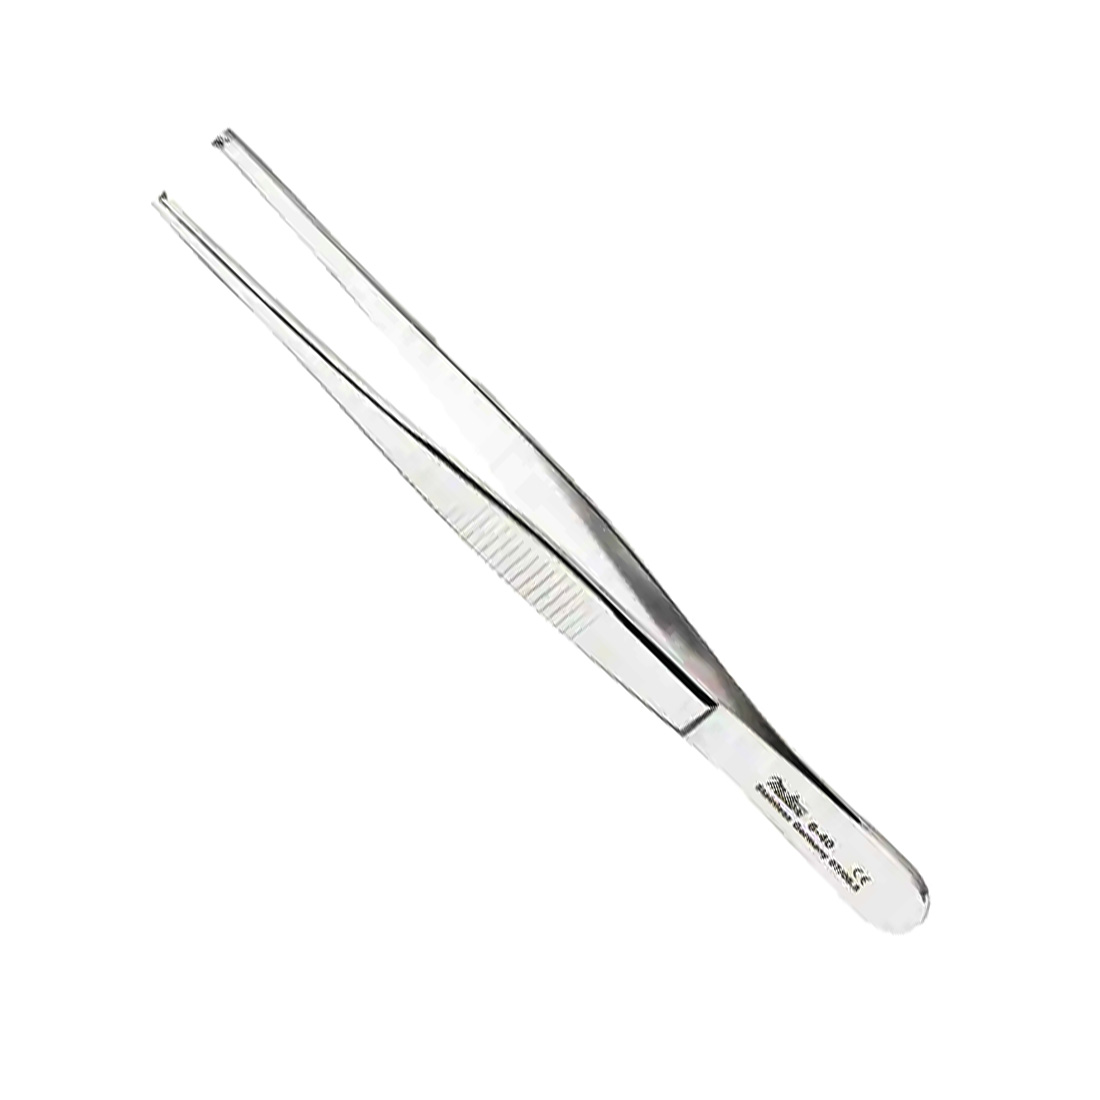 Tissue Forceps, 1 x 2 Teeth, 4-1/2" with Serrated Handles